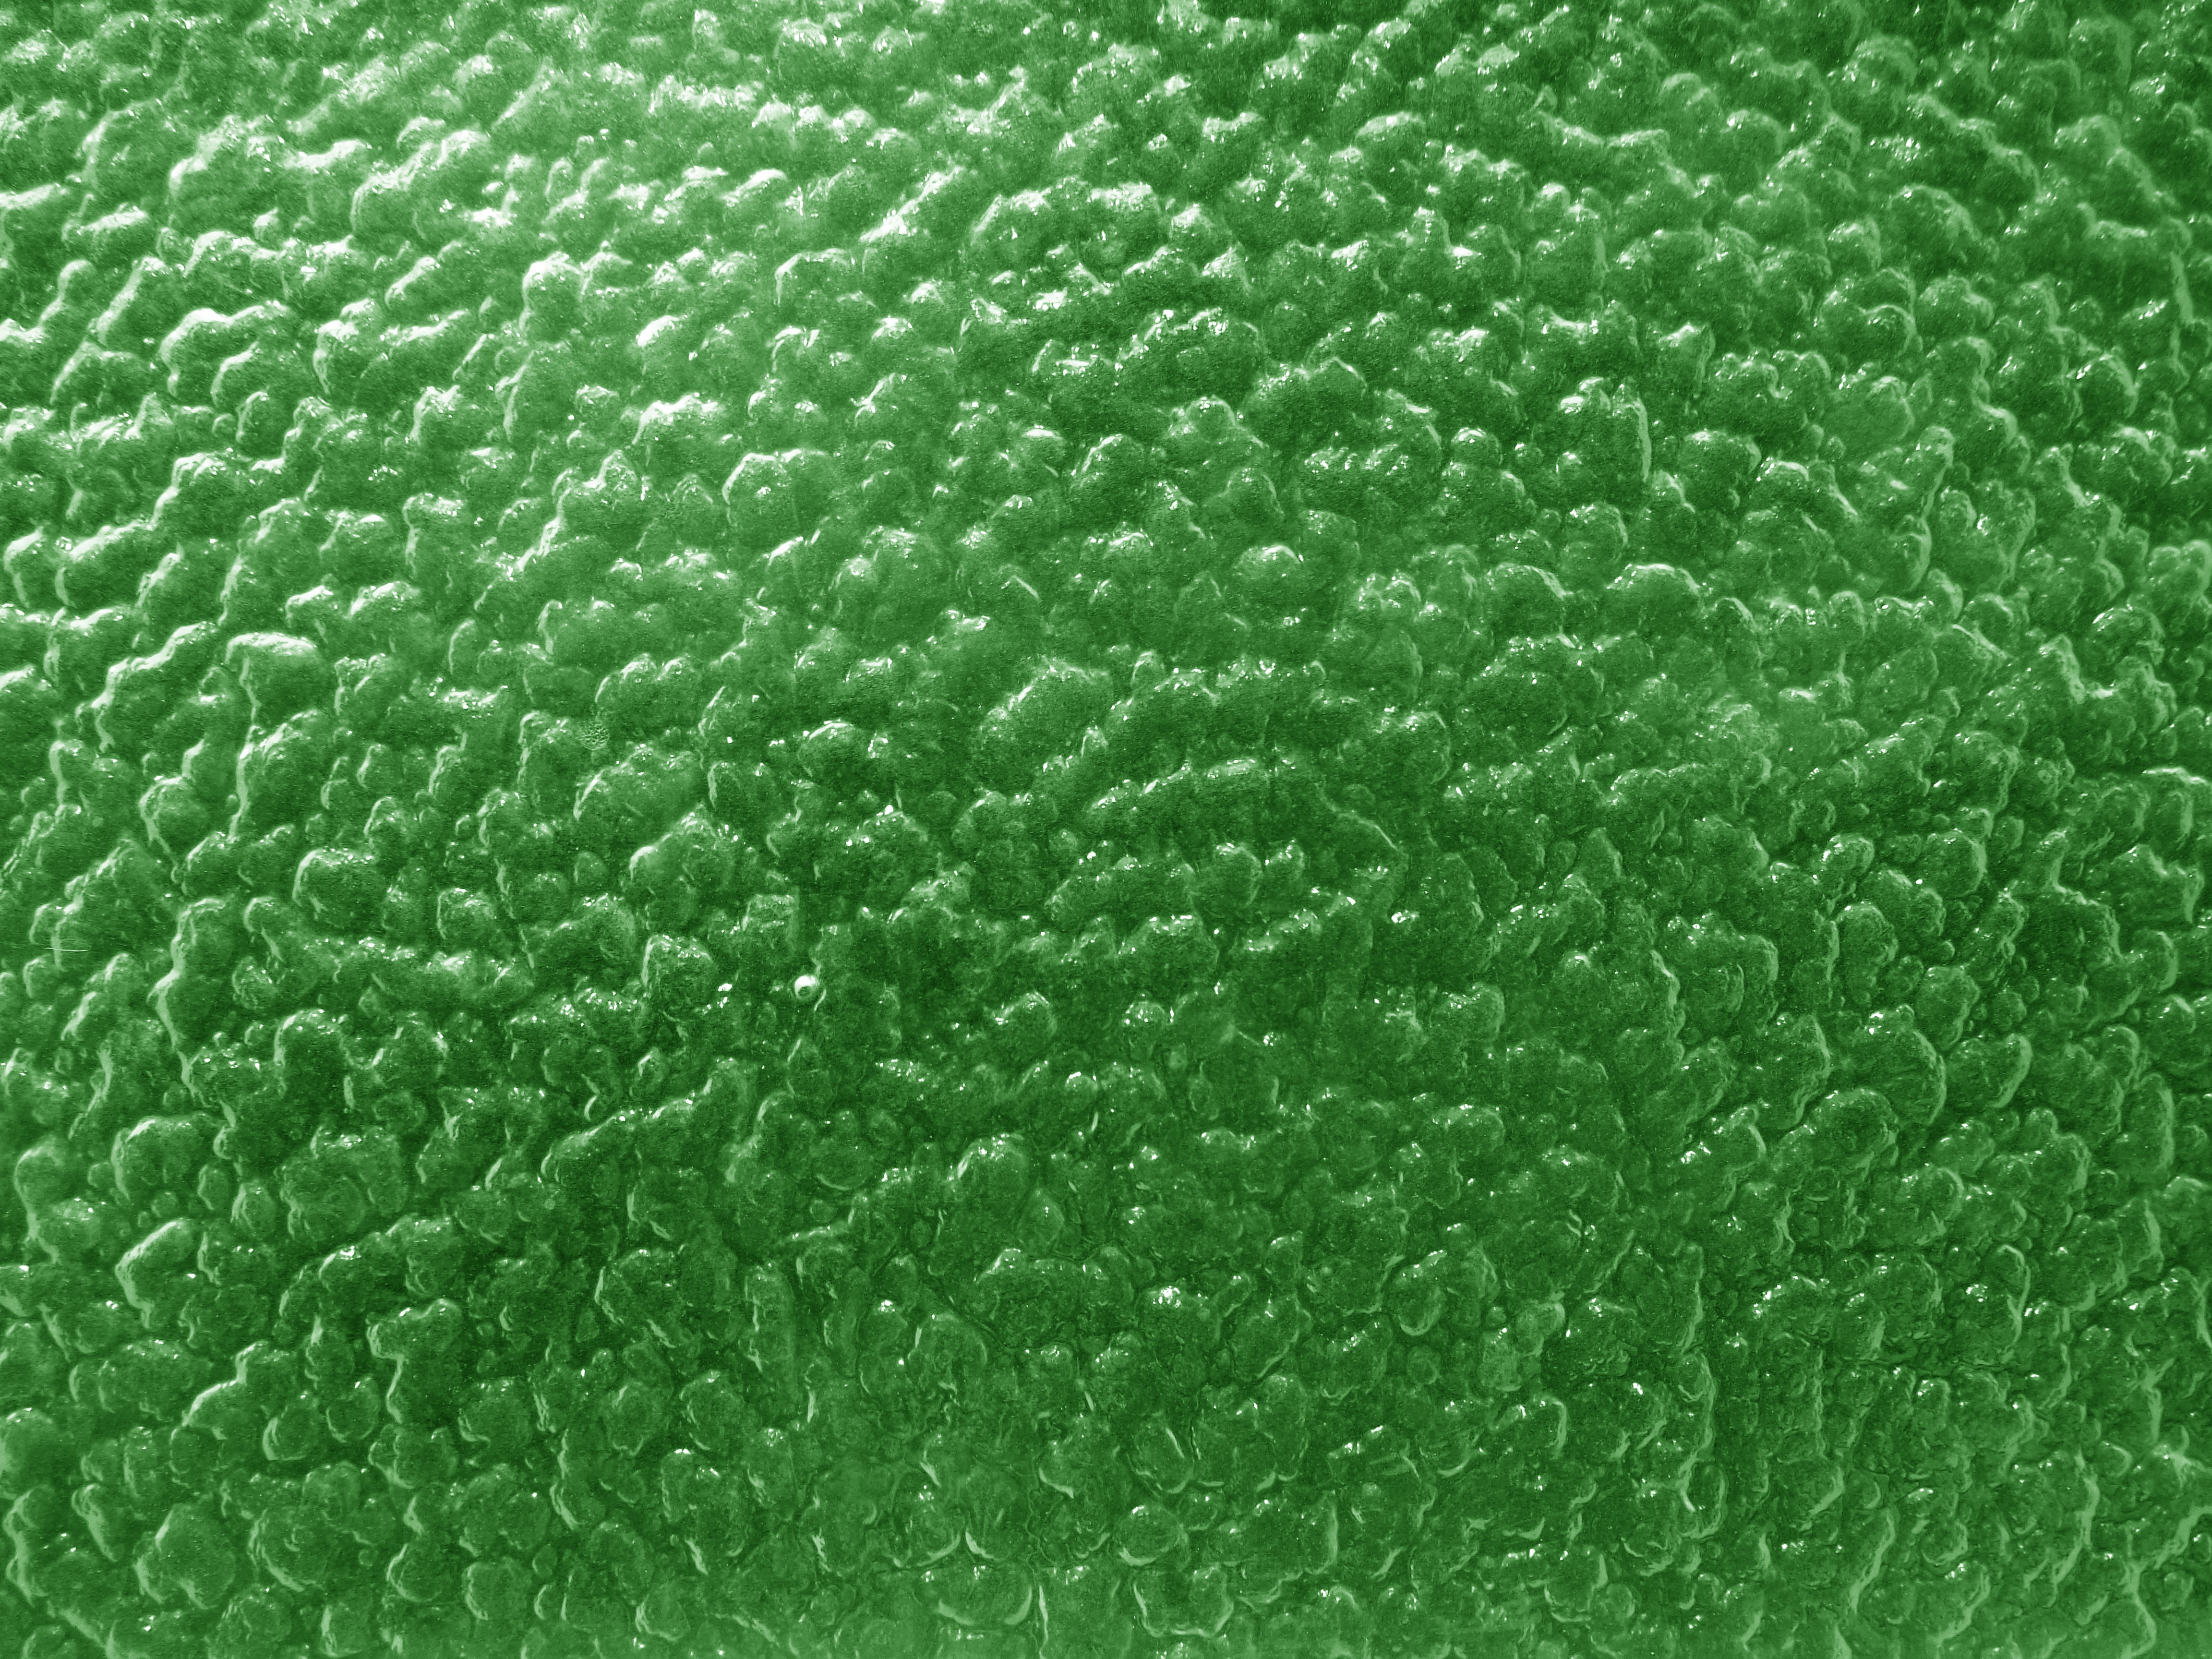 Green Textured Glass with Bumpy Surface Picture | Free Photograph ...